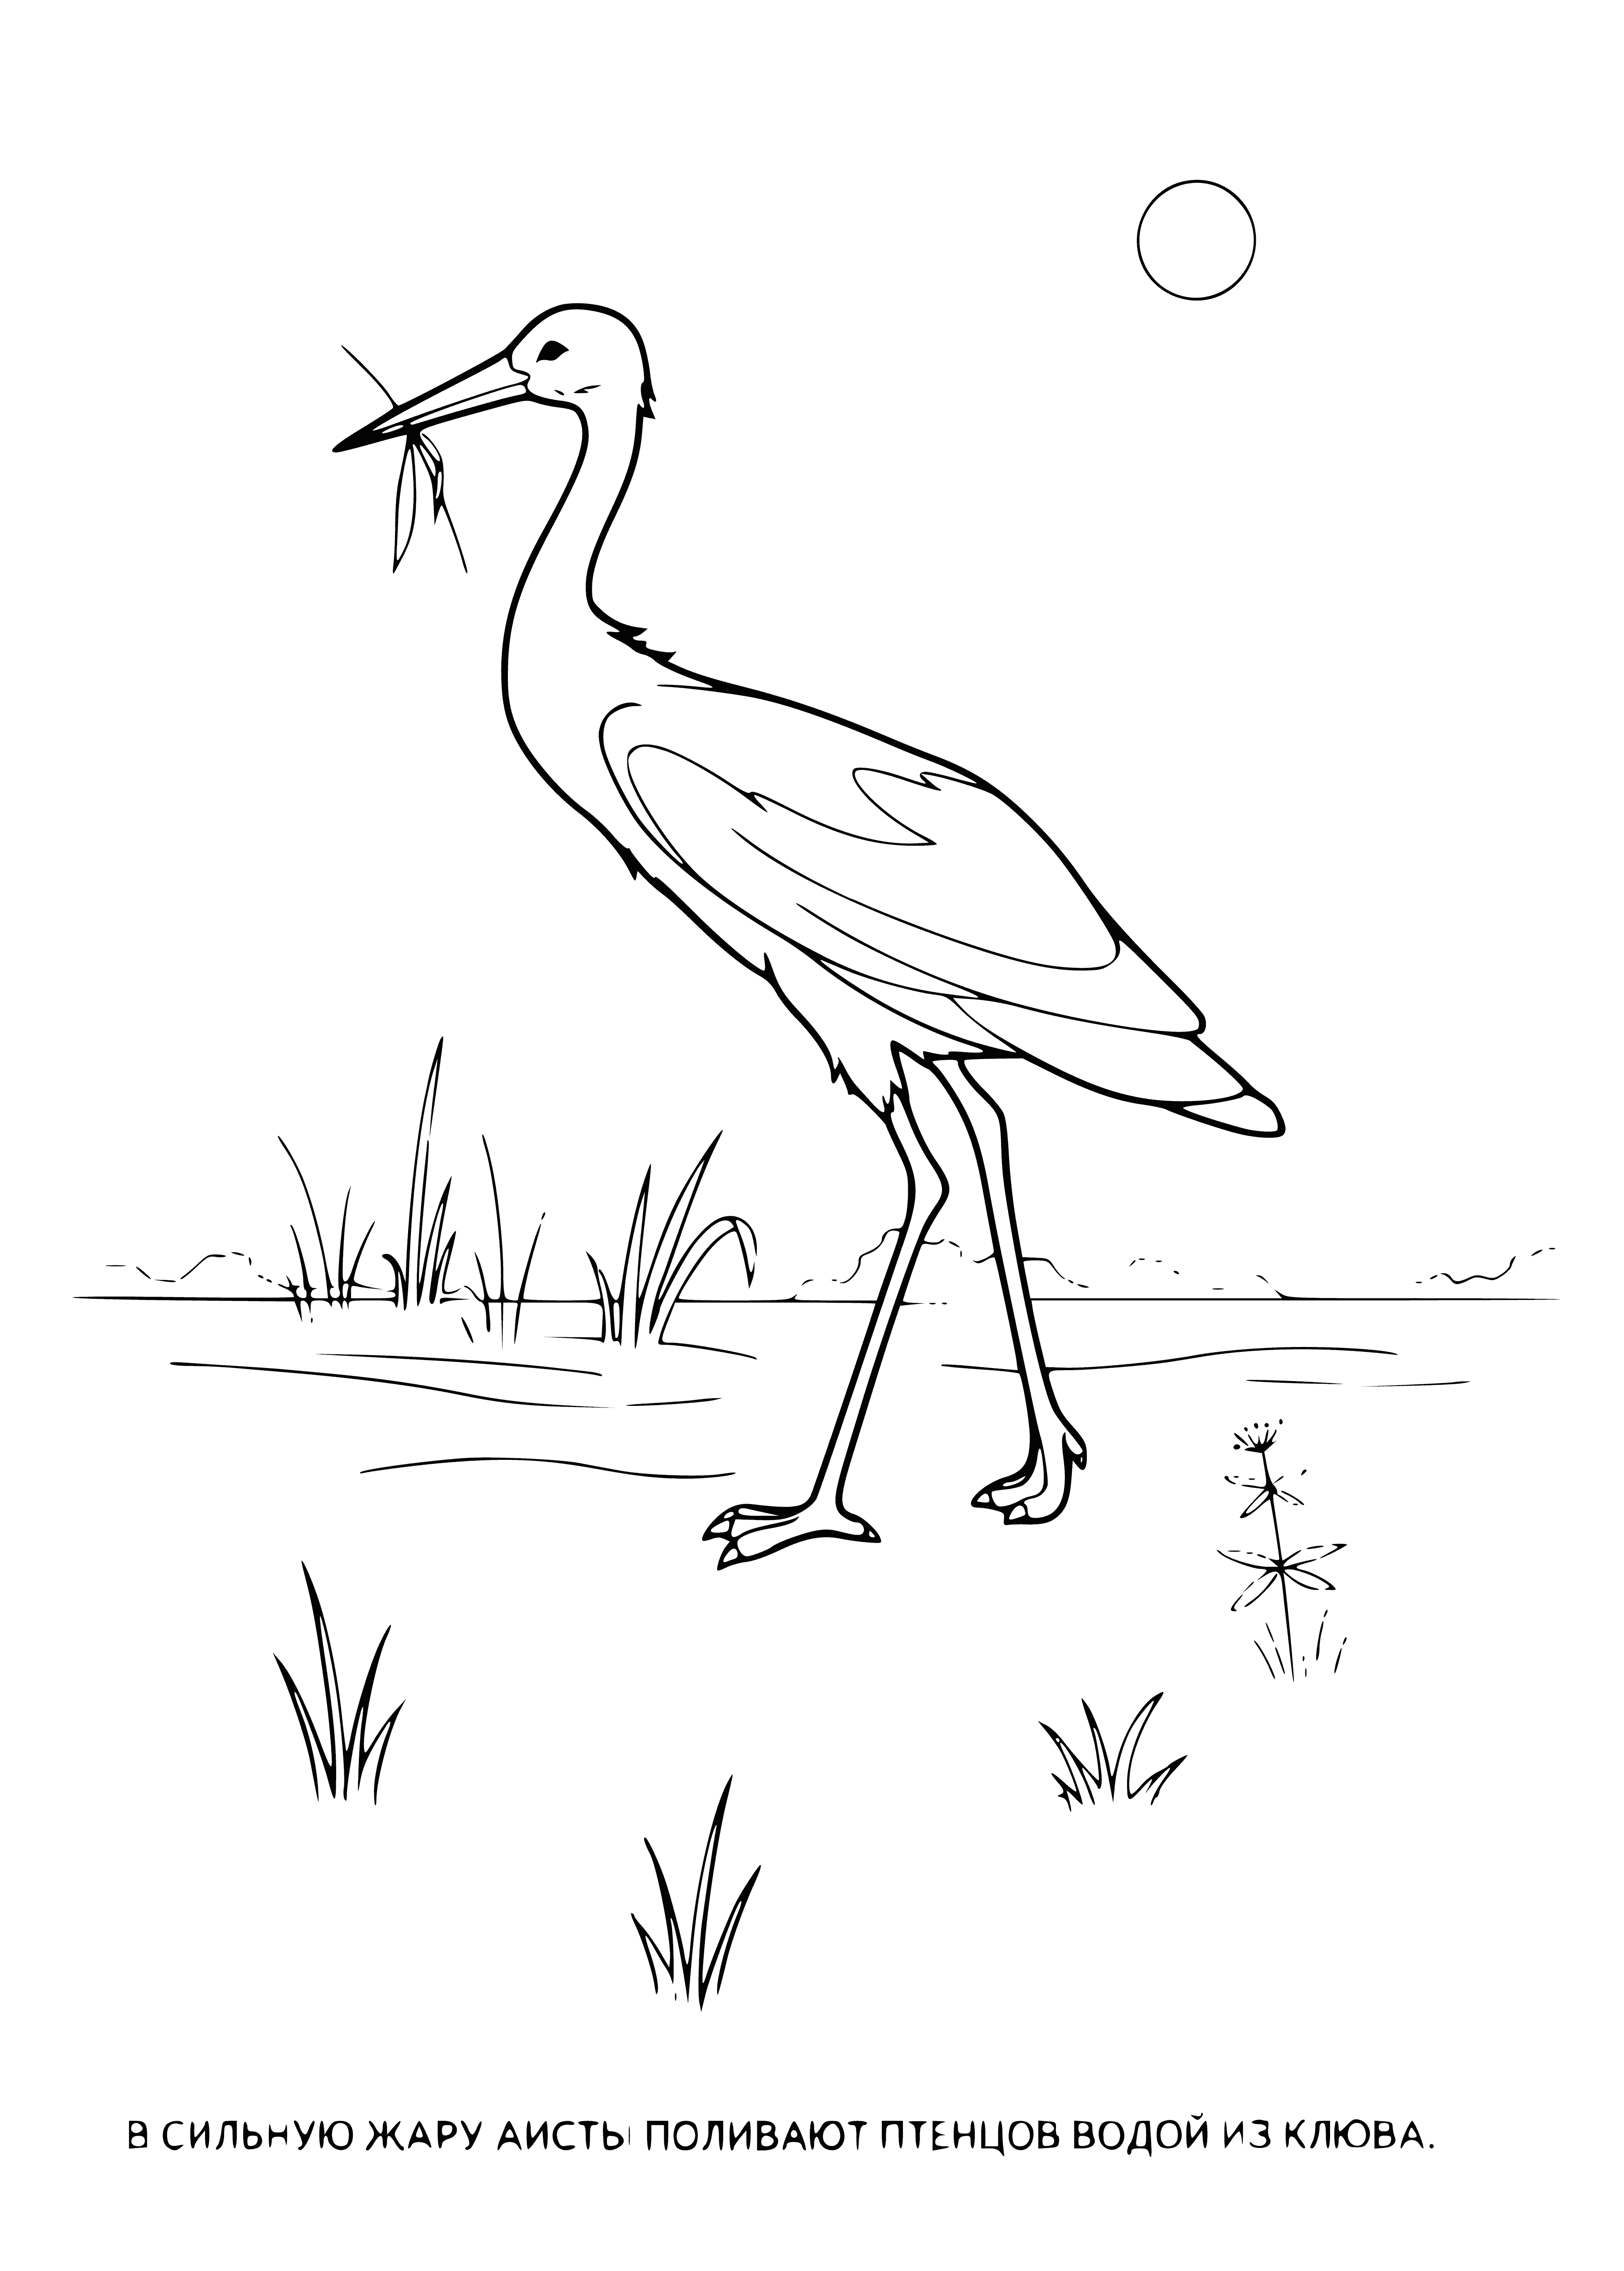 Stork coloring page